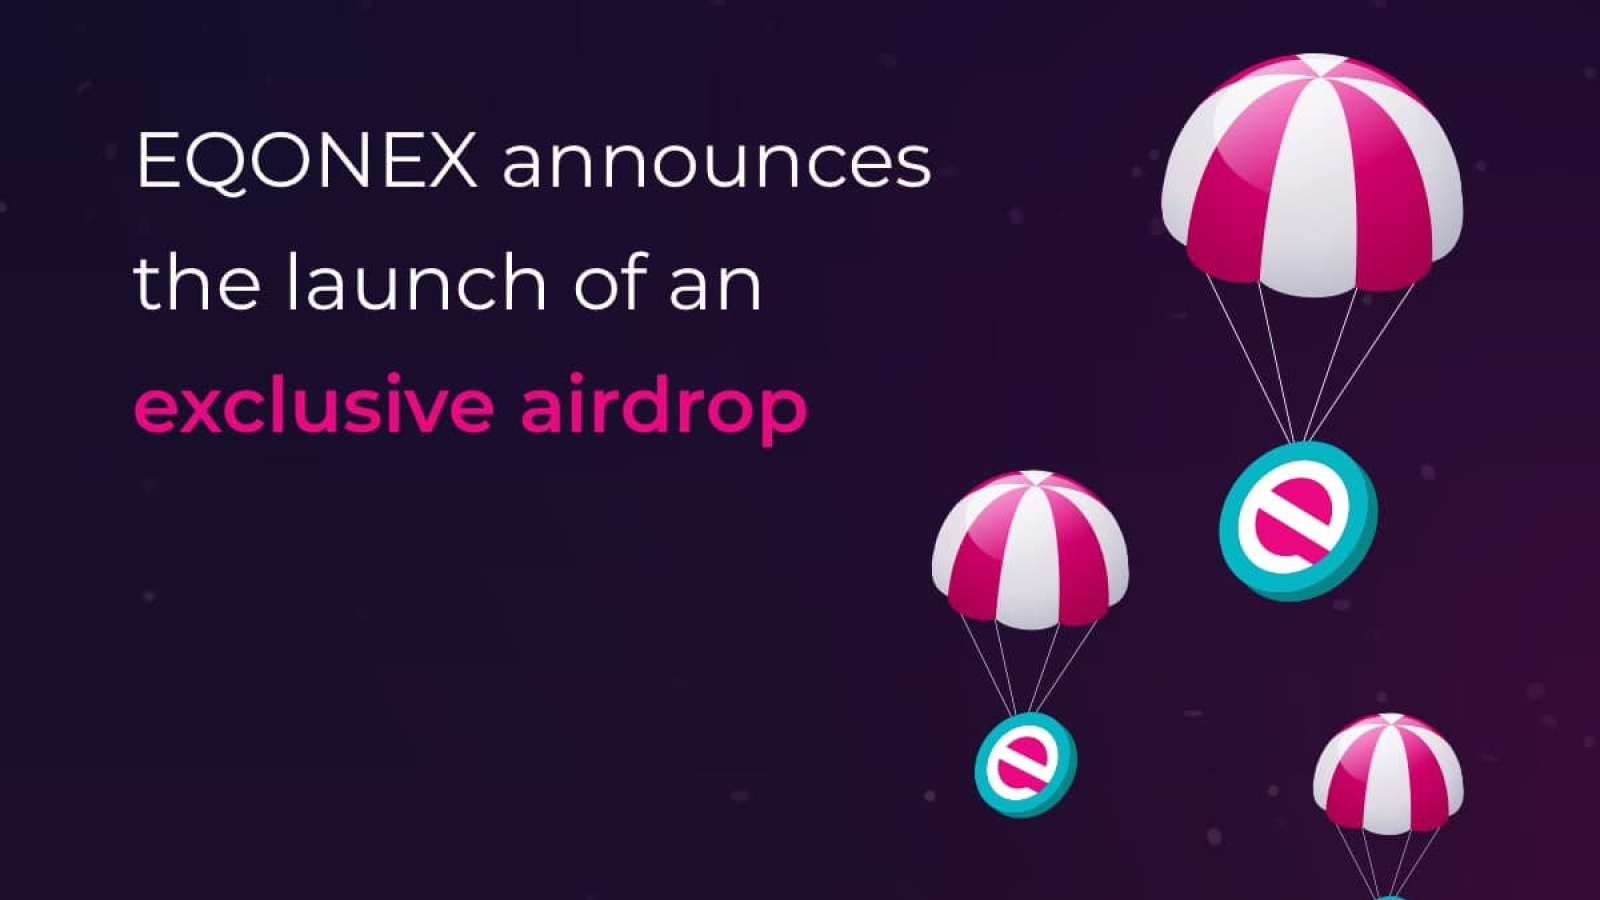 EQONEX announces the launch of an exclusive airdrop